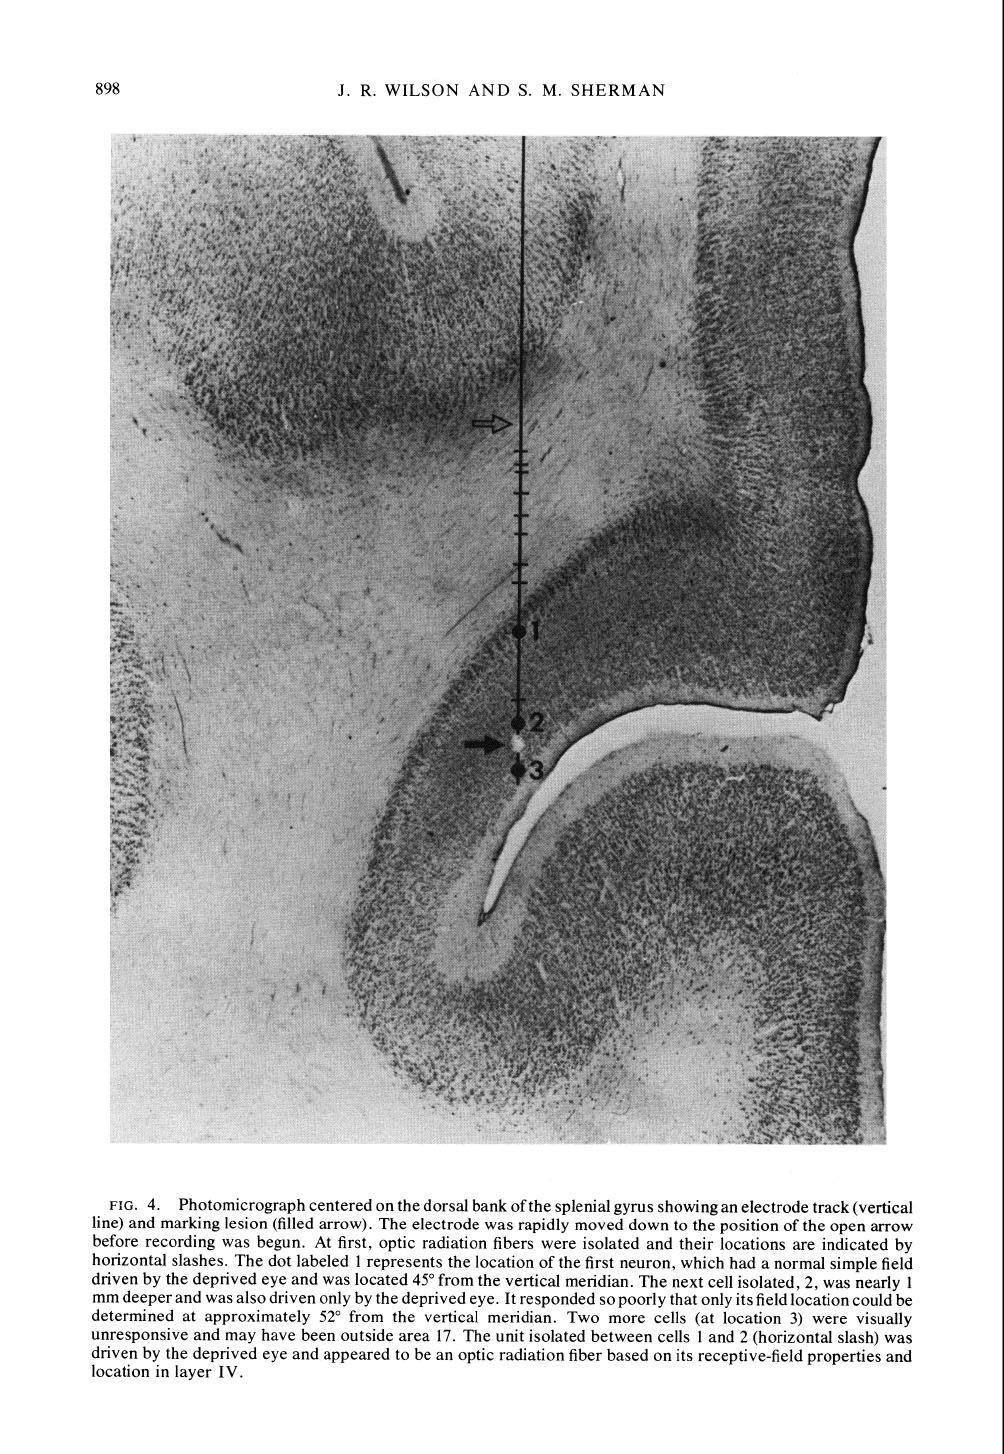 898 J. R. WILSON AND S. M. SHERMAN FIG. 4. Photomicrograph centered on the dorsal bank of the splenial gyrus showing an electrode track (vertical line) and marking lesion (filled arrow).